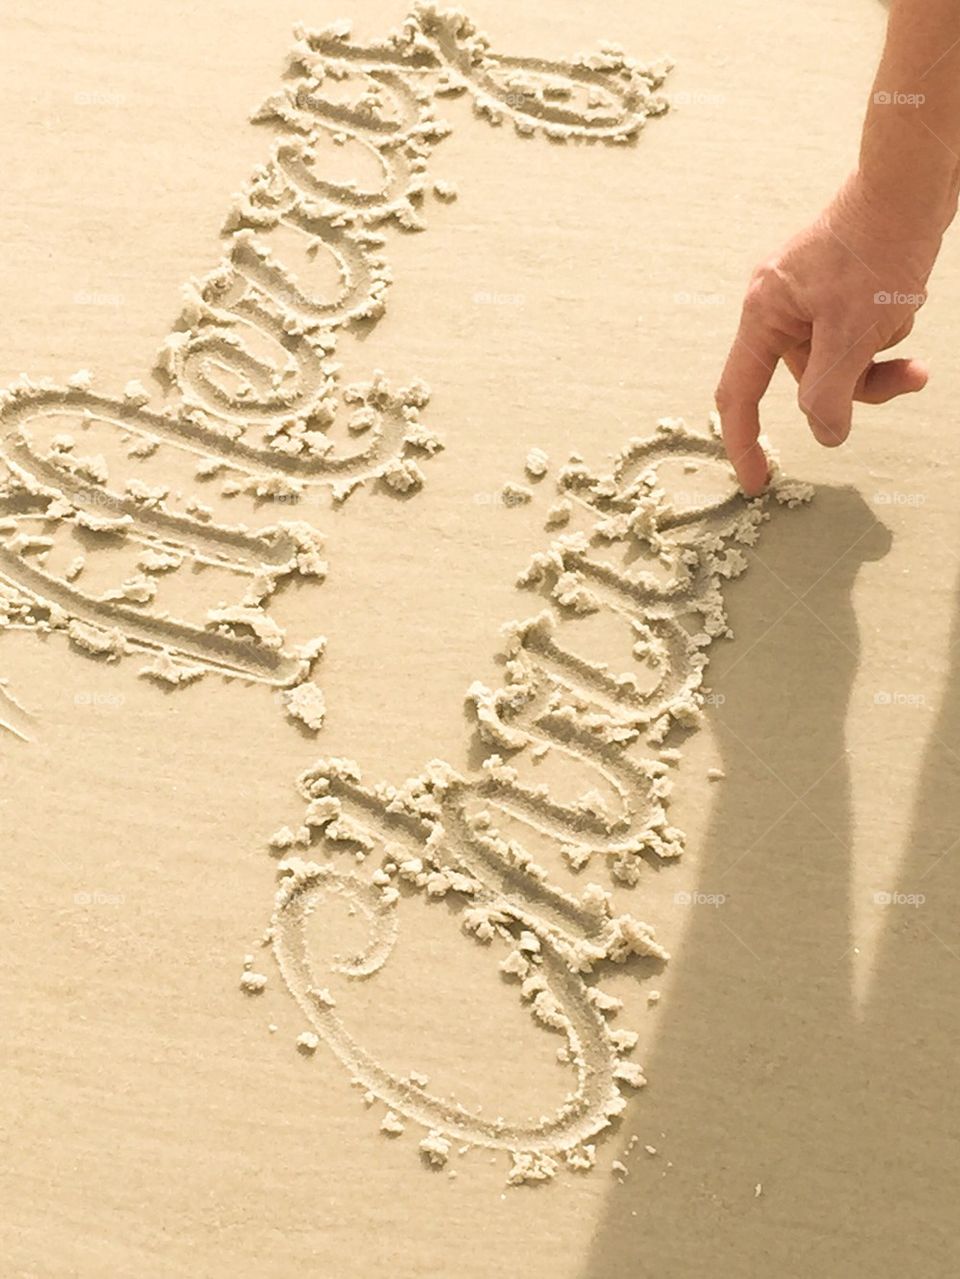 Writing In The Sand... Merry Christmas To All